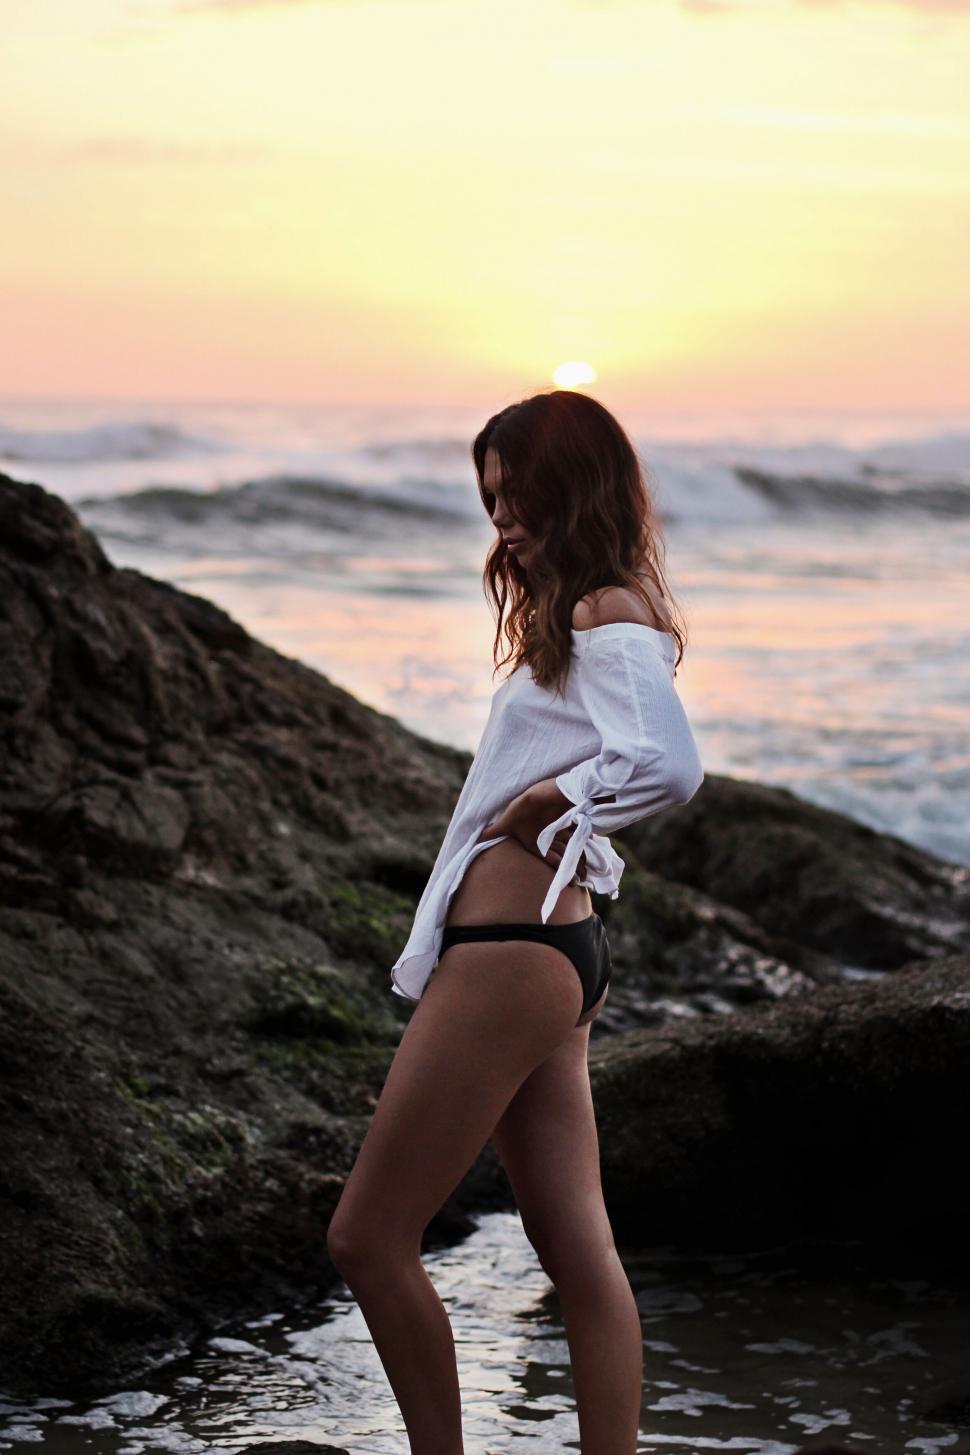 Free Image of Woman in white shirt at beach during sunset 